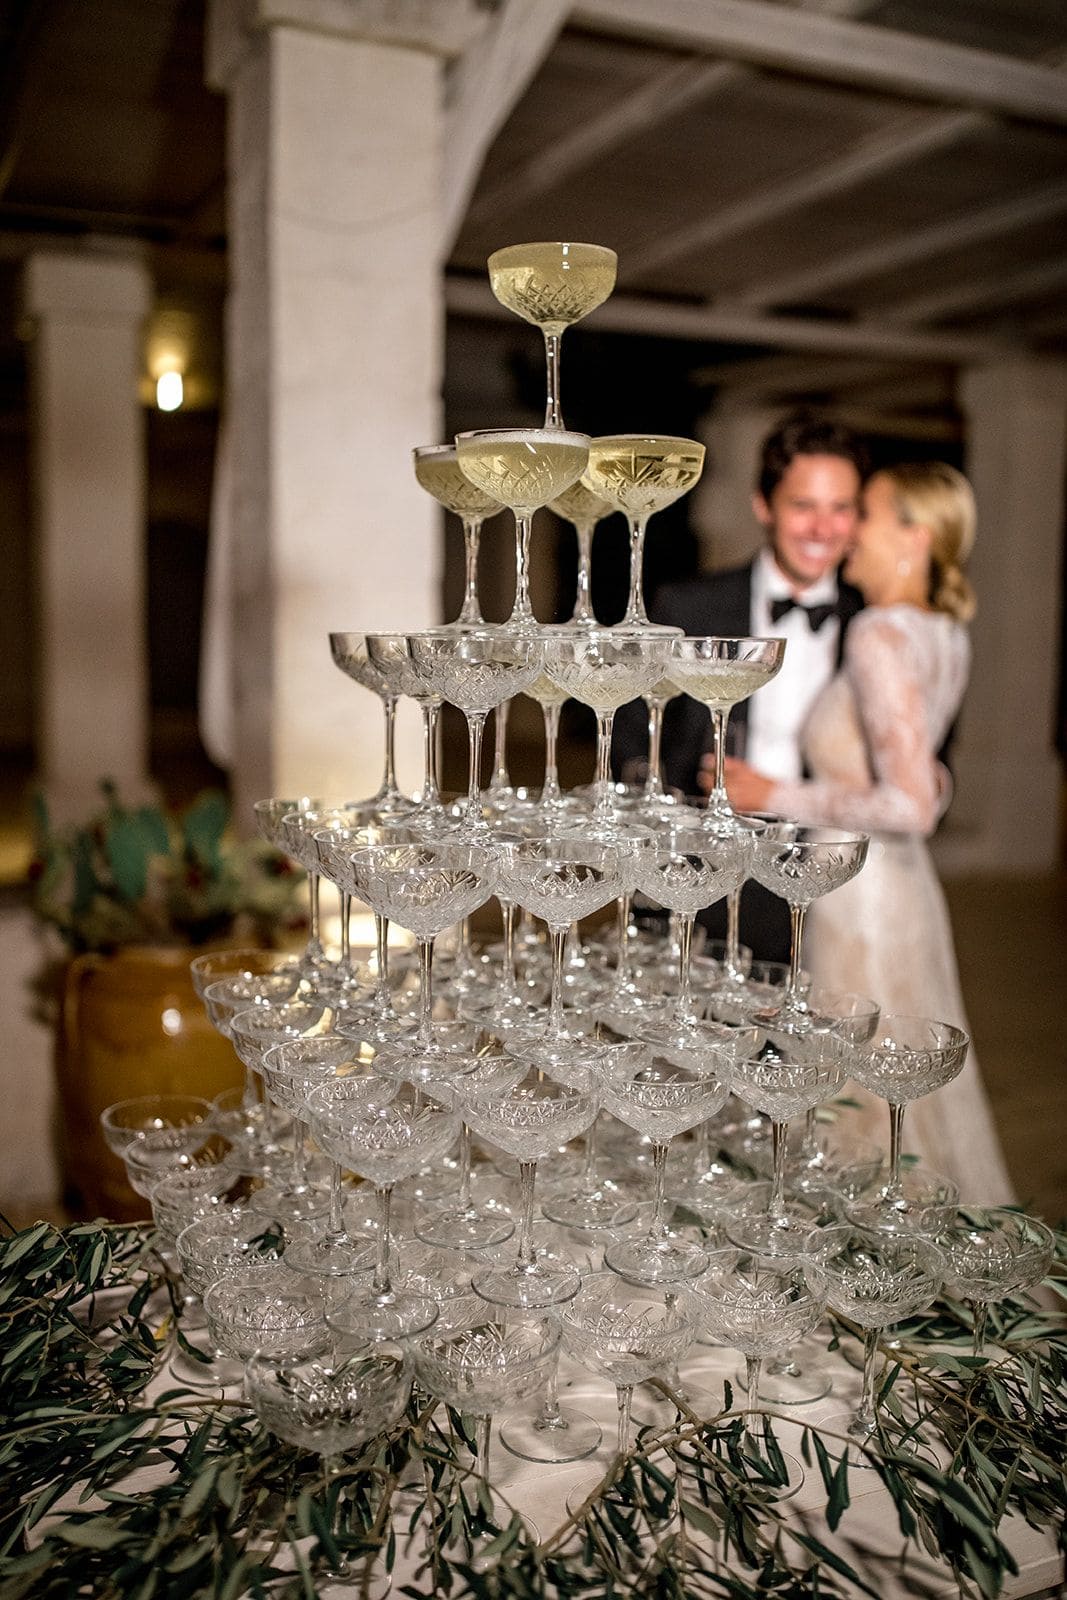 Bride and groom with champagne tower at wedding reception